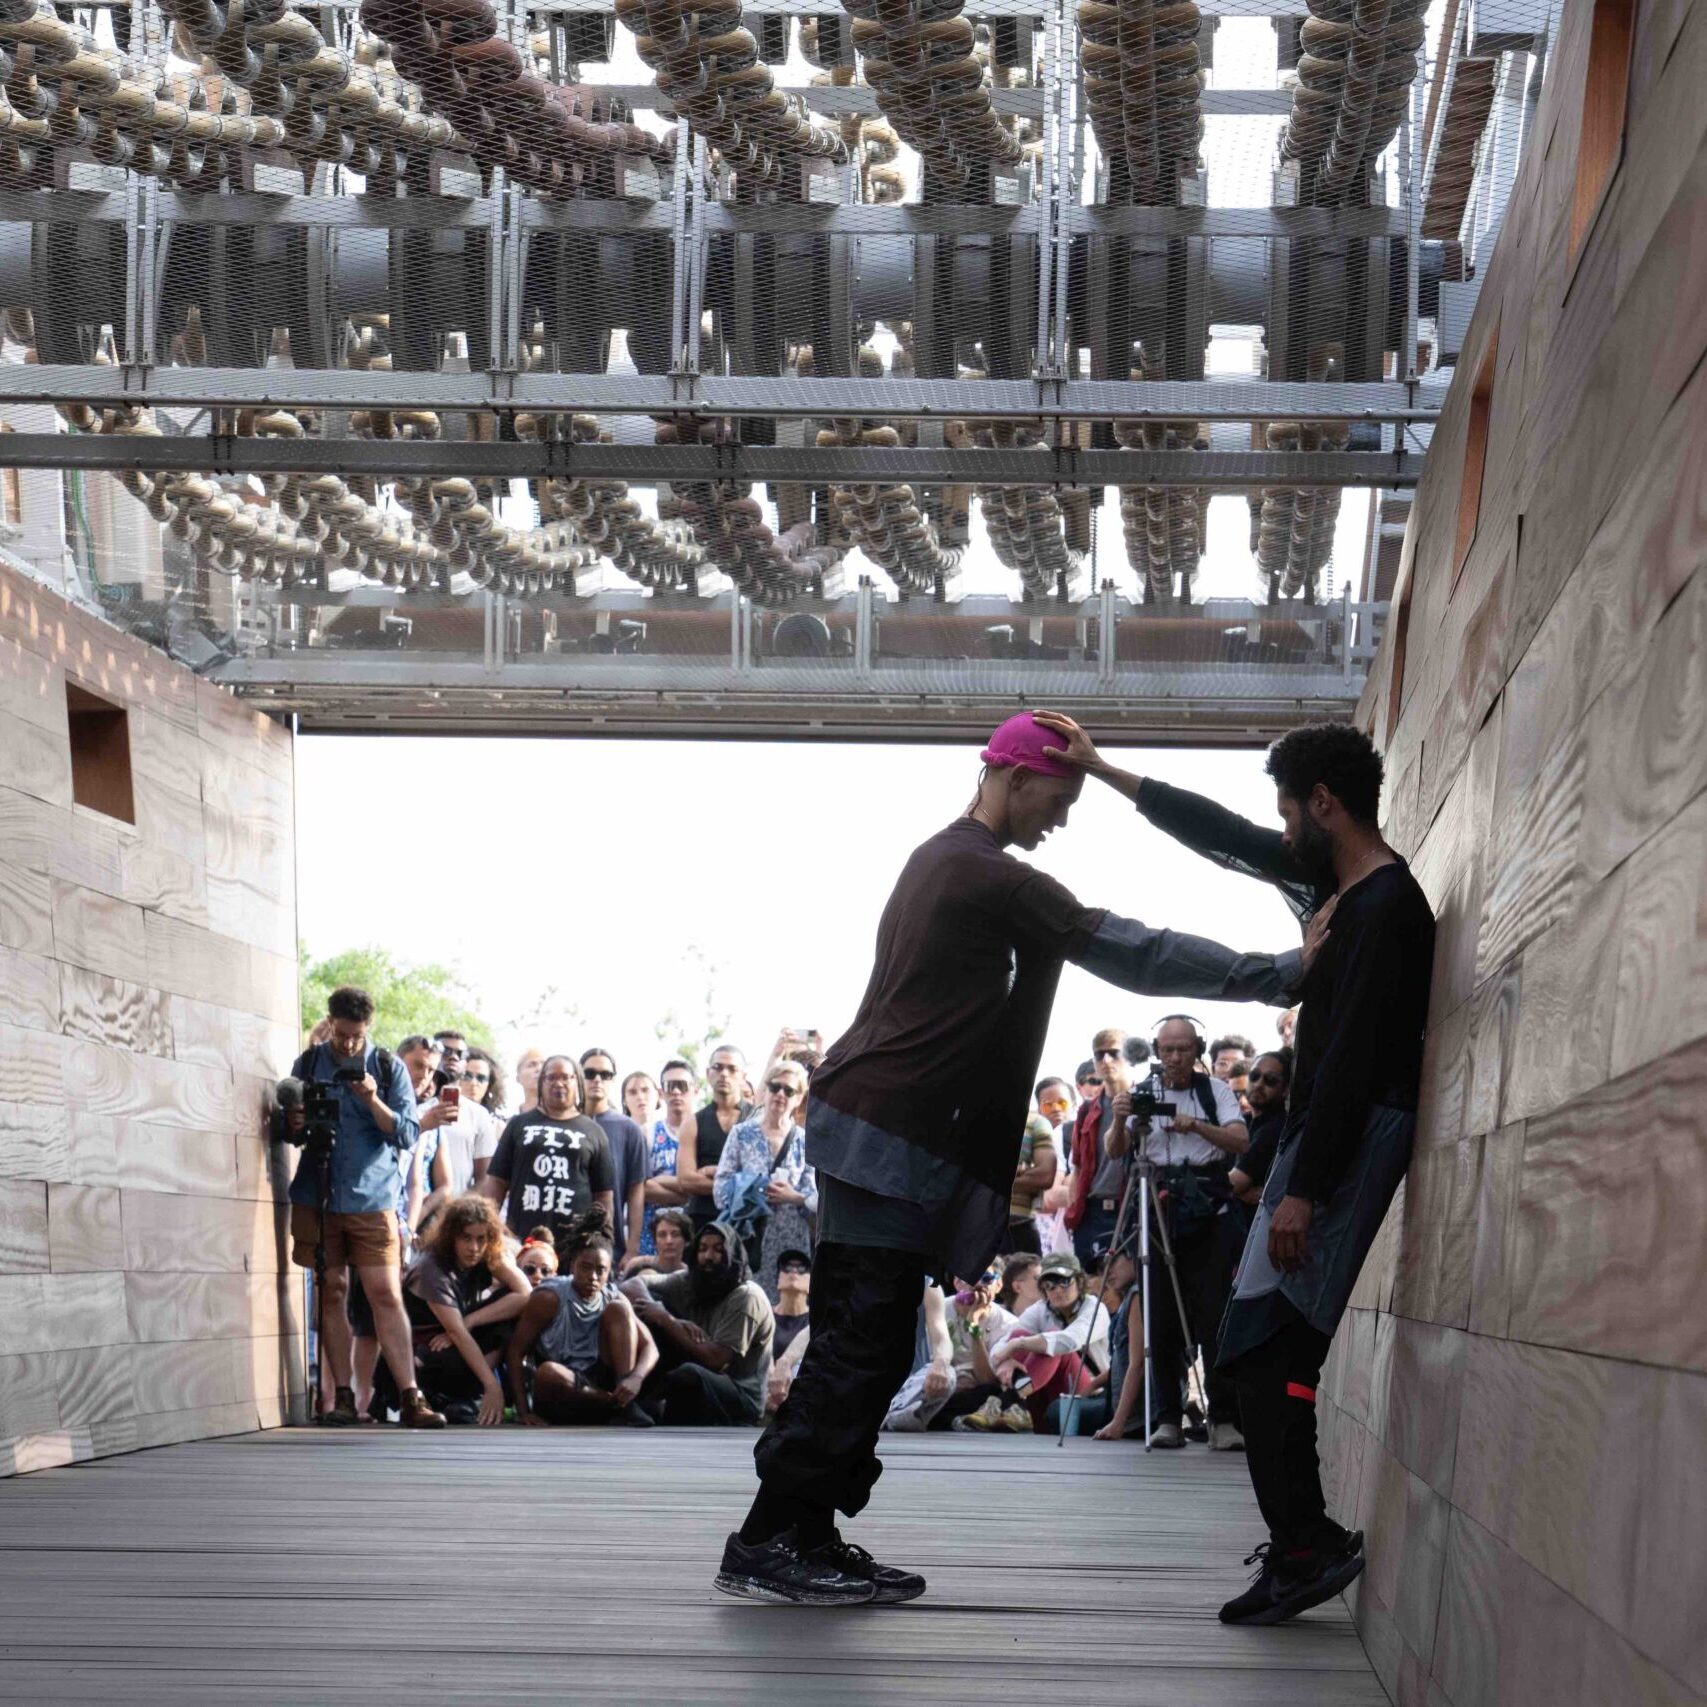 duel c, Andros Zins-Browne, Outlook Hill, Governors Island, Photo by Julieta Cervantes